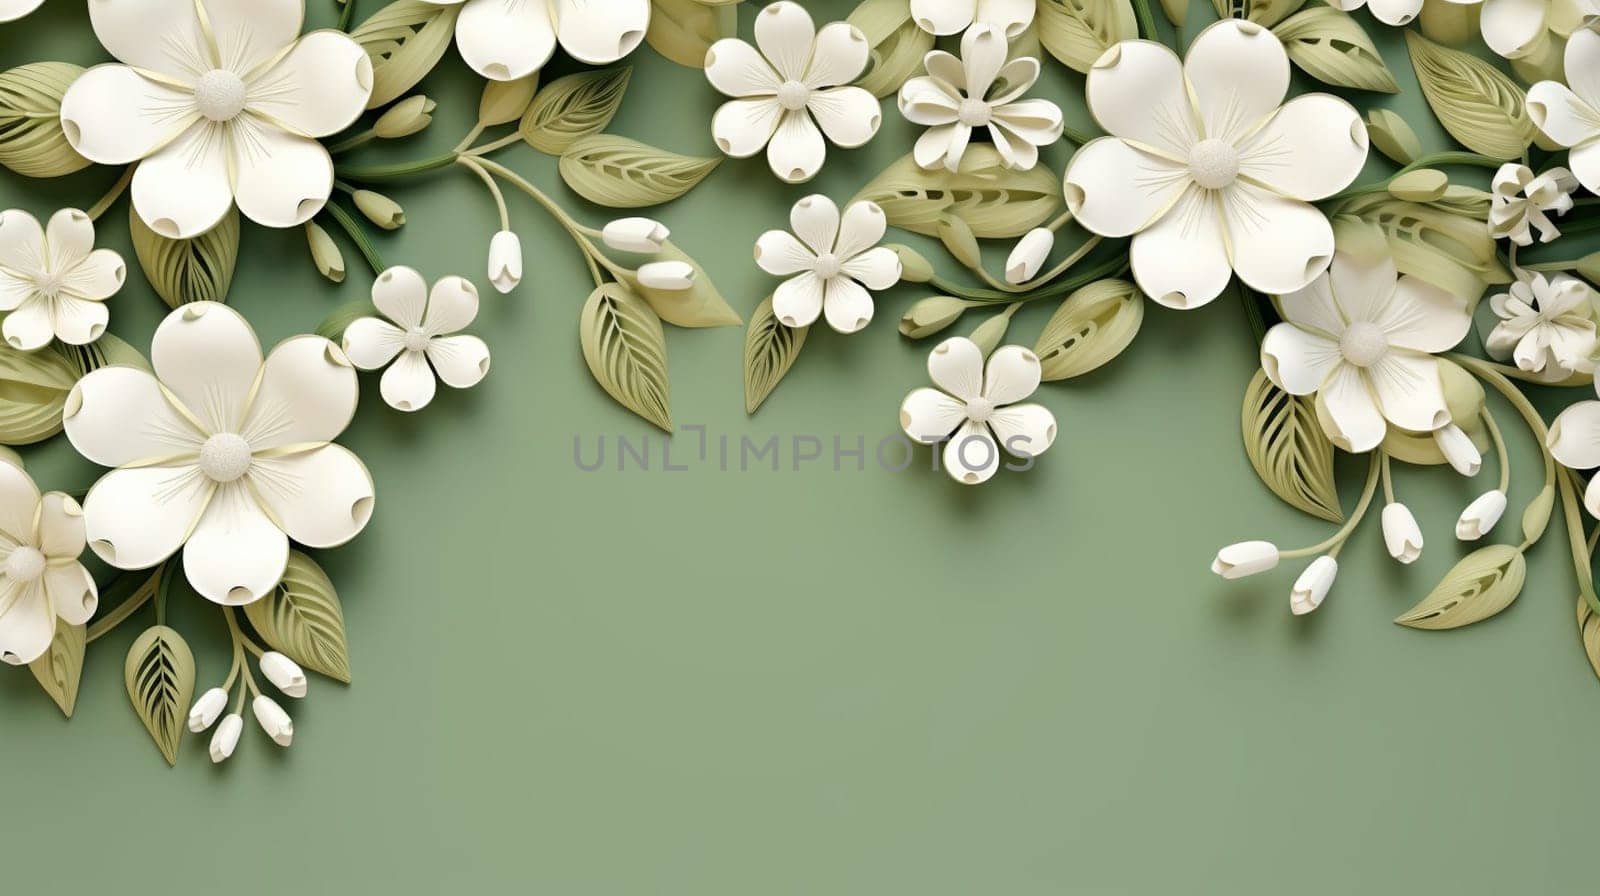 A 3D illustration of white paper flowers and green leaves on a solid dark green background, with a creative design and crafted aesthetic by kizuneko